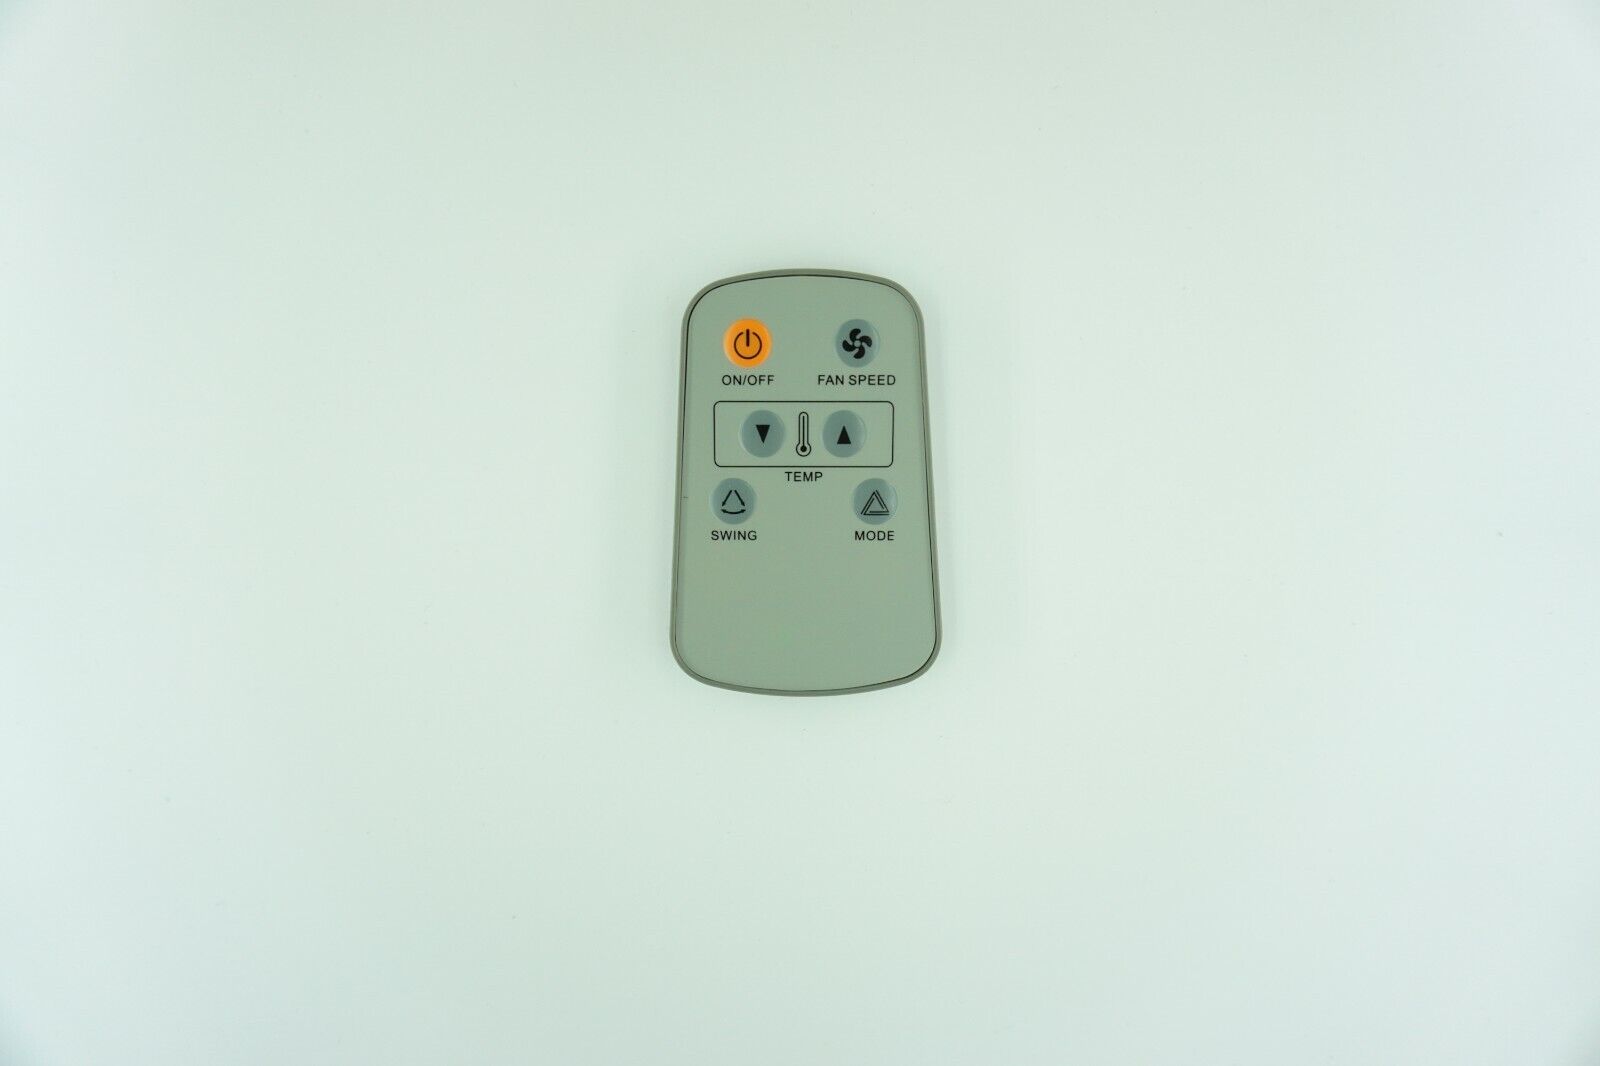 Remote Control For Unionaire Union aire THROUGH WALL ROOM Window Air Conditioner